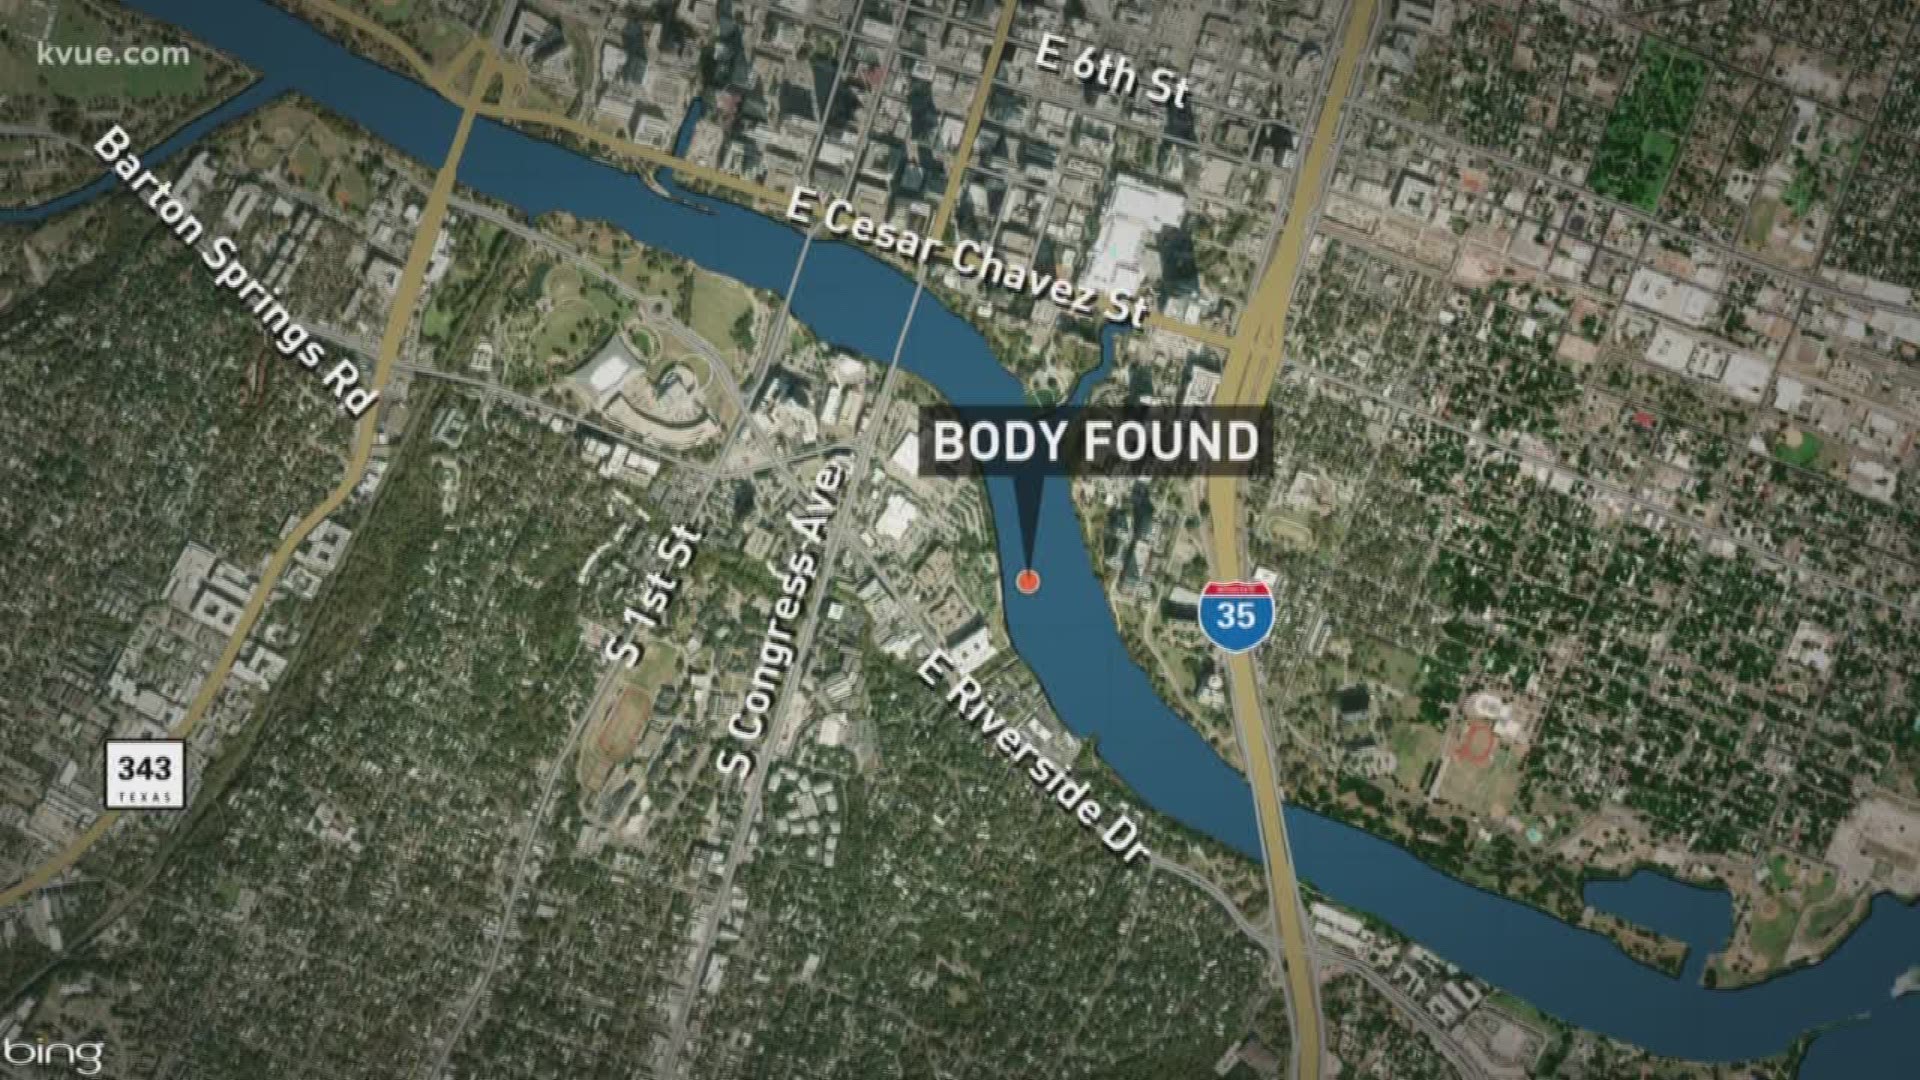 Austin-Travis County EMS recovered the body of a man believed to be in his 40s in Lady Bird Lake, officials say.